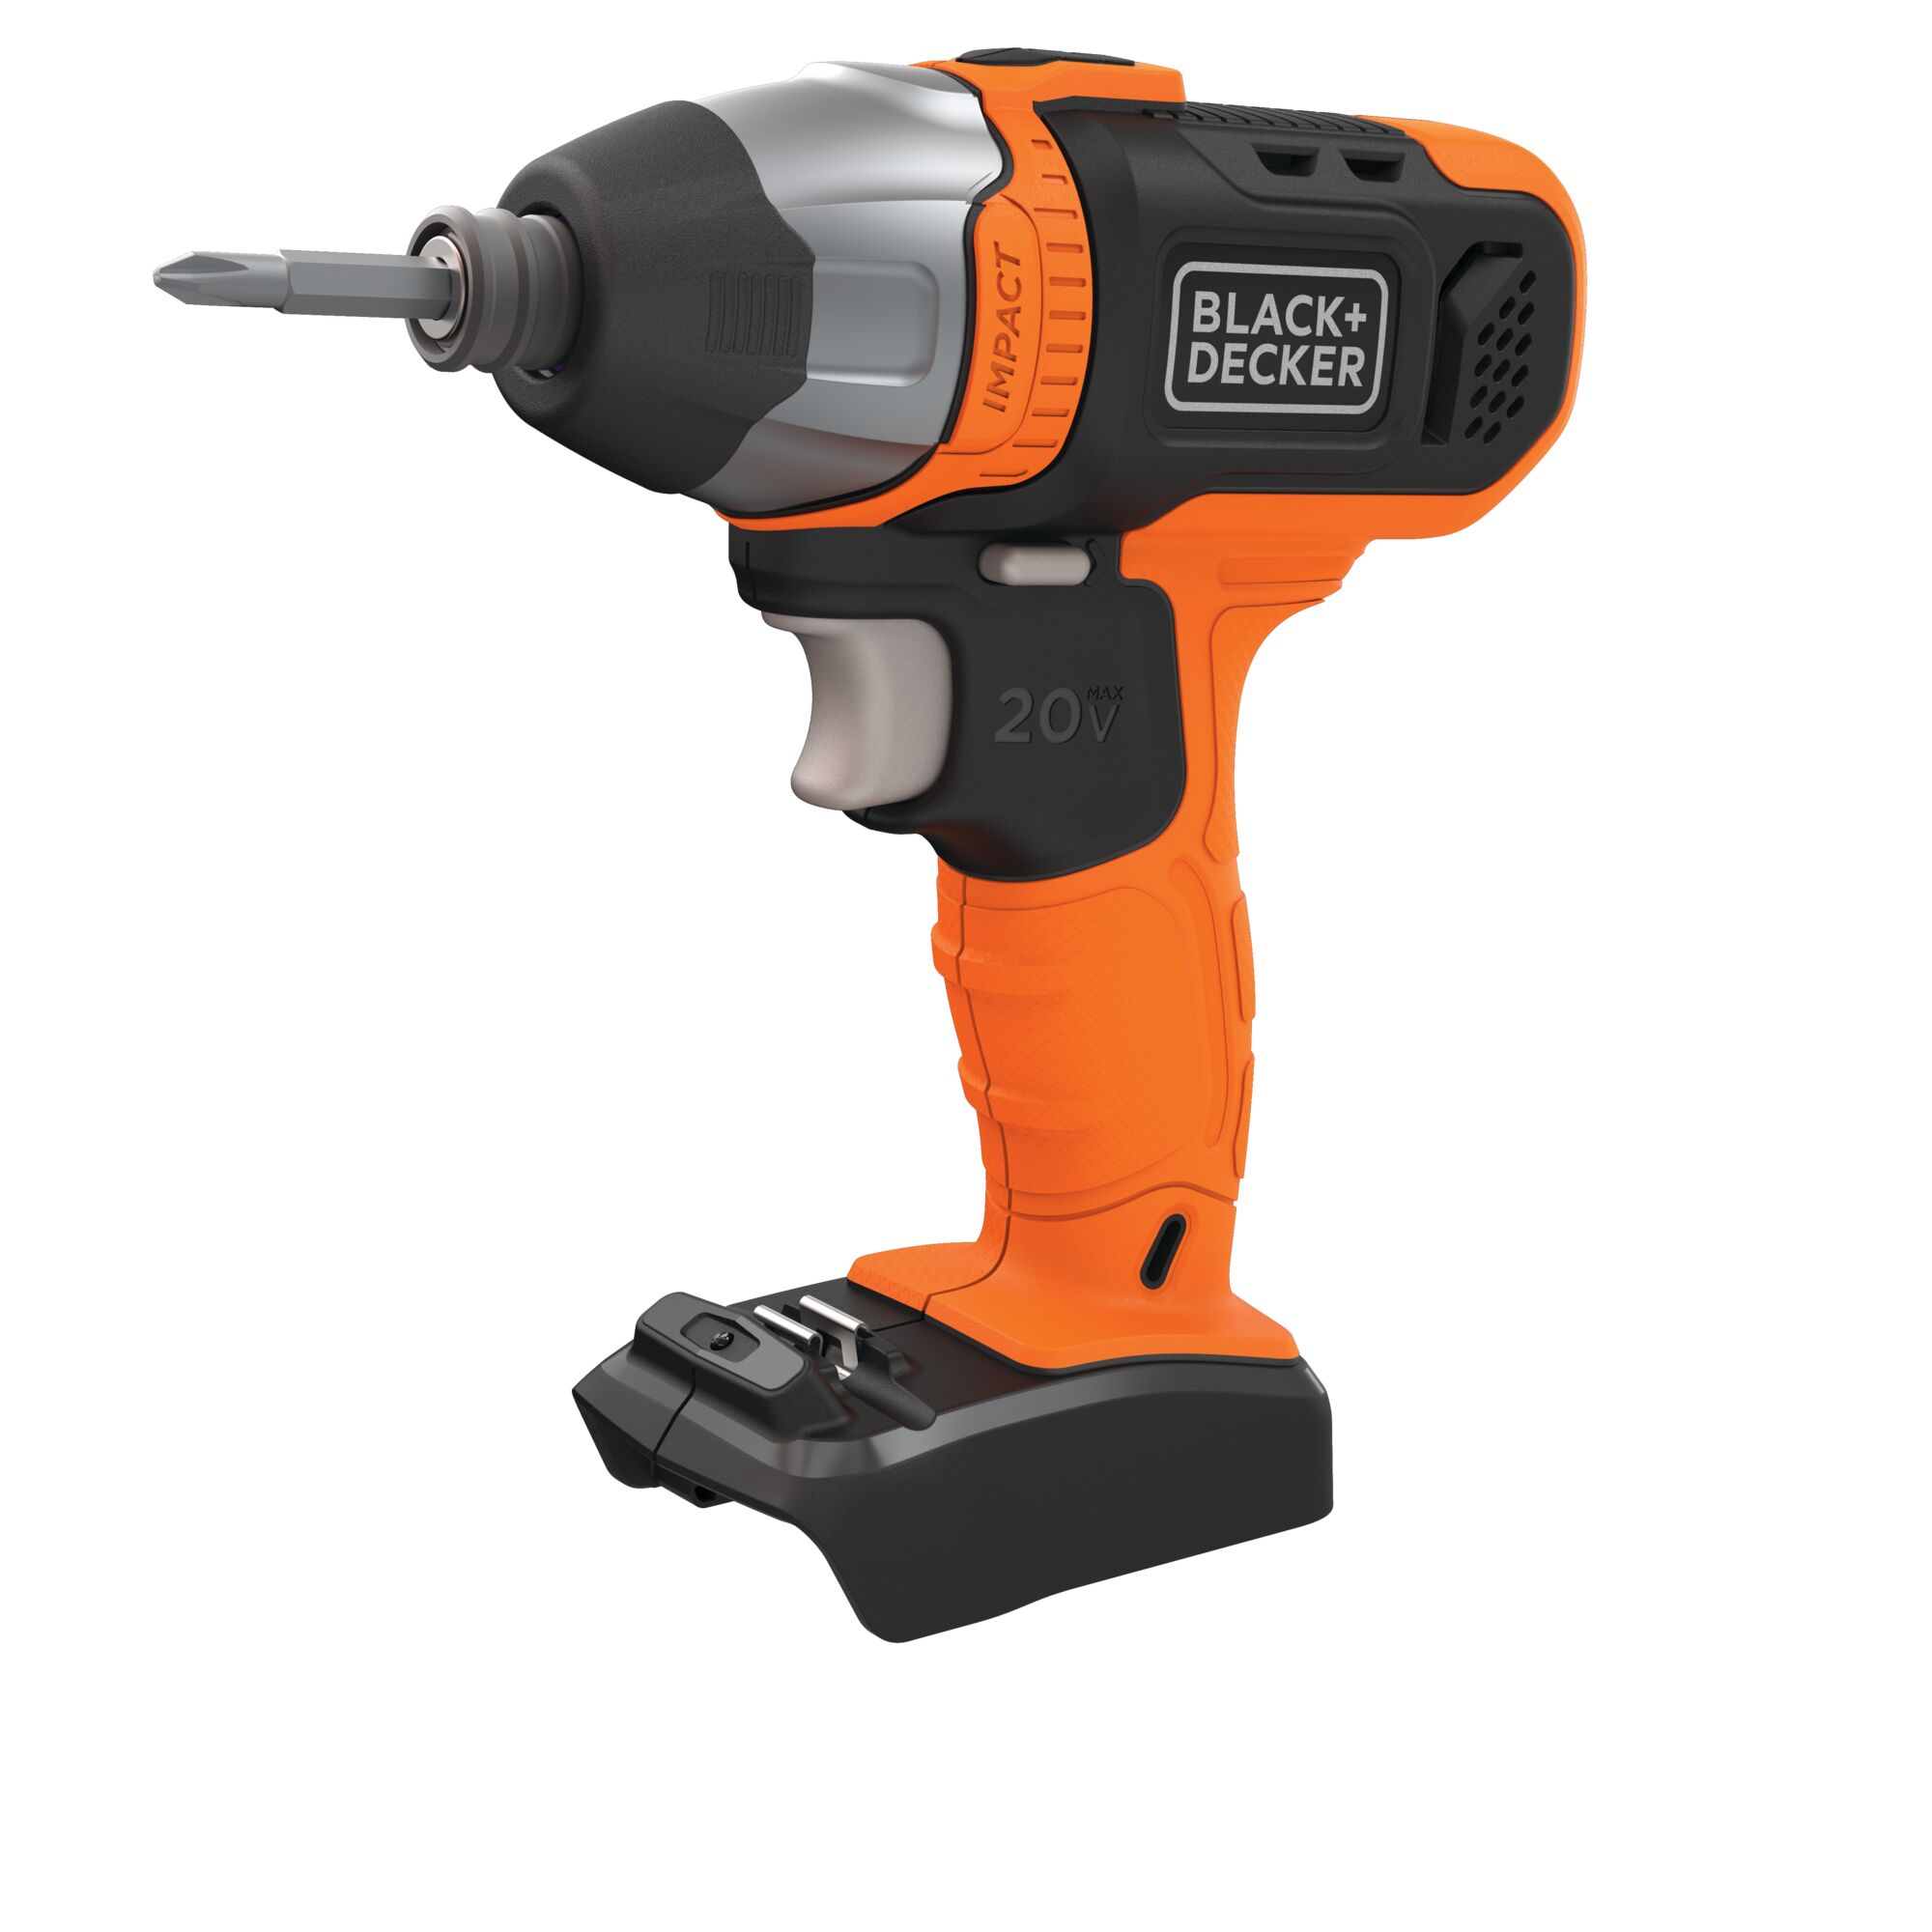 Profile of lithium ion drill driver.